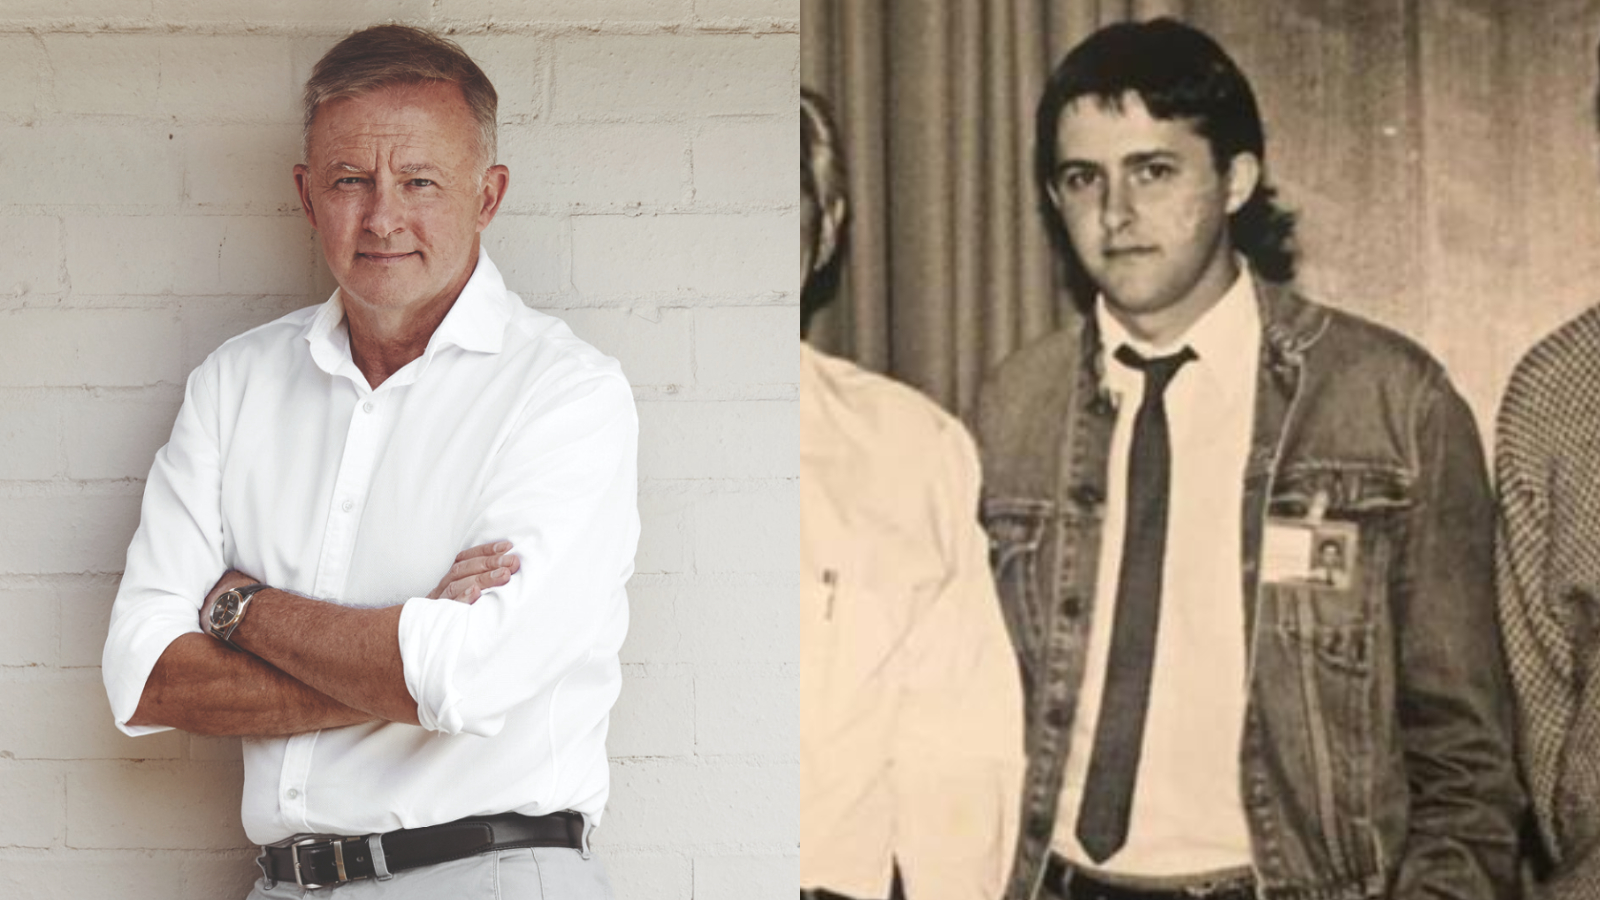 Anthony Albanese’s ‘Glow-Up’ Suggests Australia Is No Place For Well-Dressed Politicians